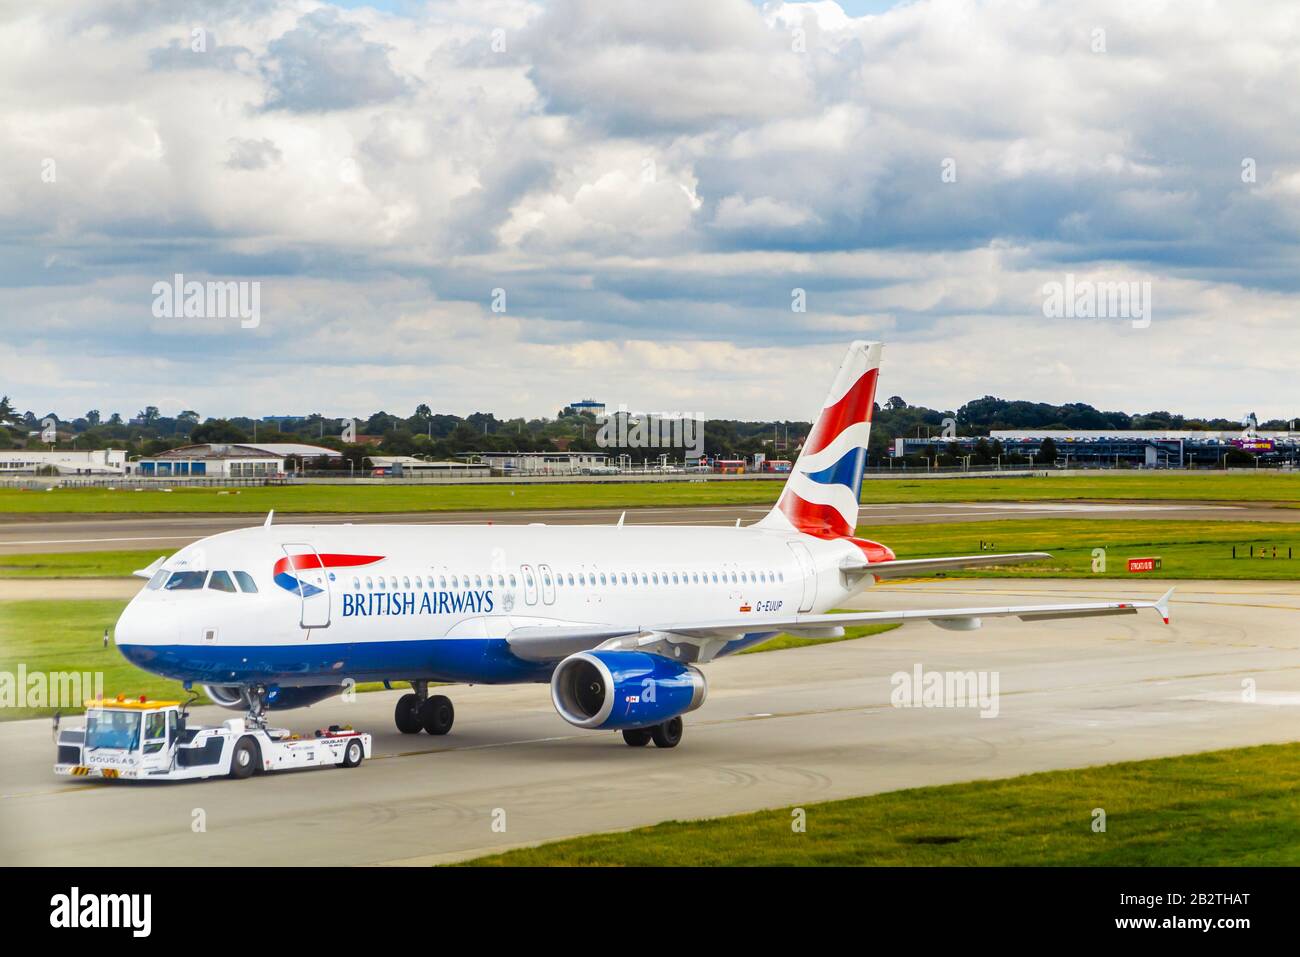 British Airways Airbus A320-232 in corporate livery being towed on the runway in London Heathrow Airport viewed from Terminal 3 under dark clouds Stock Photo